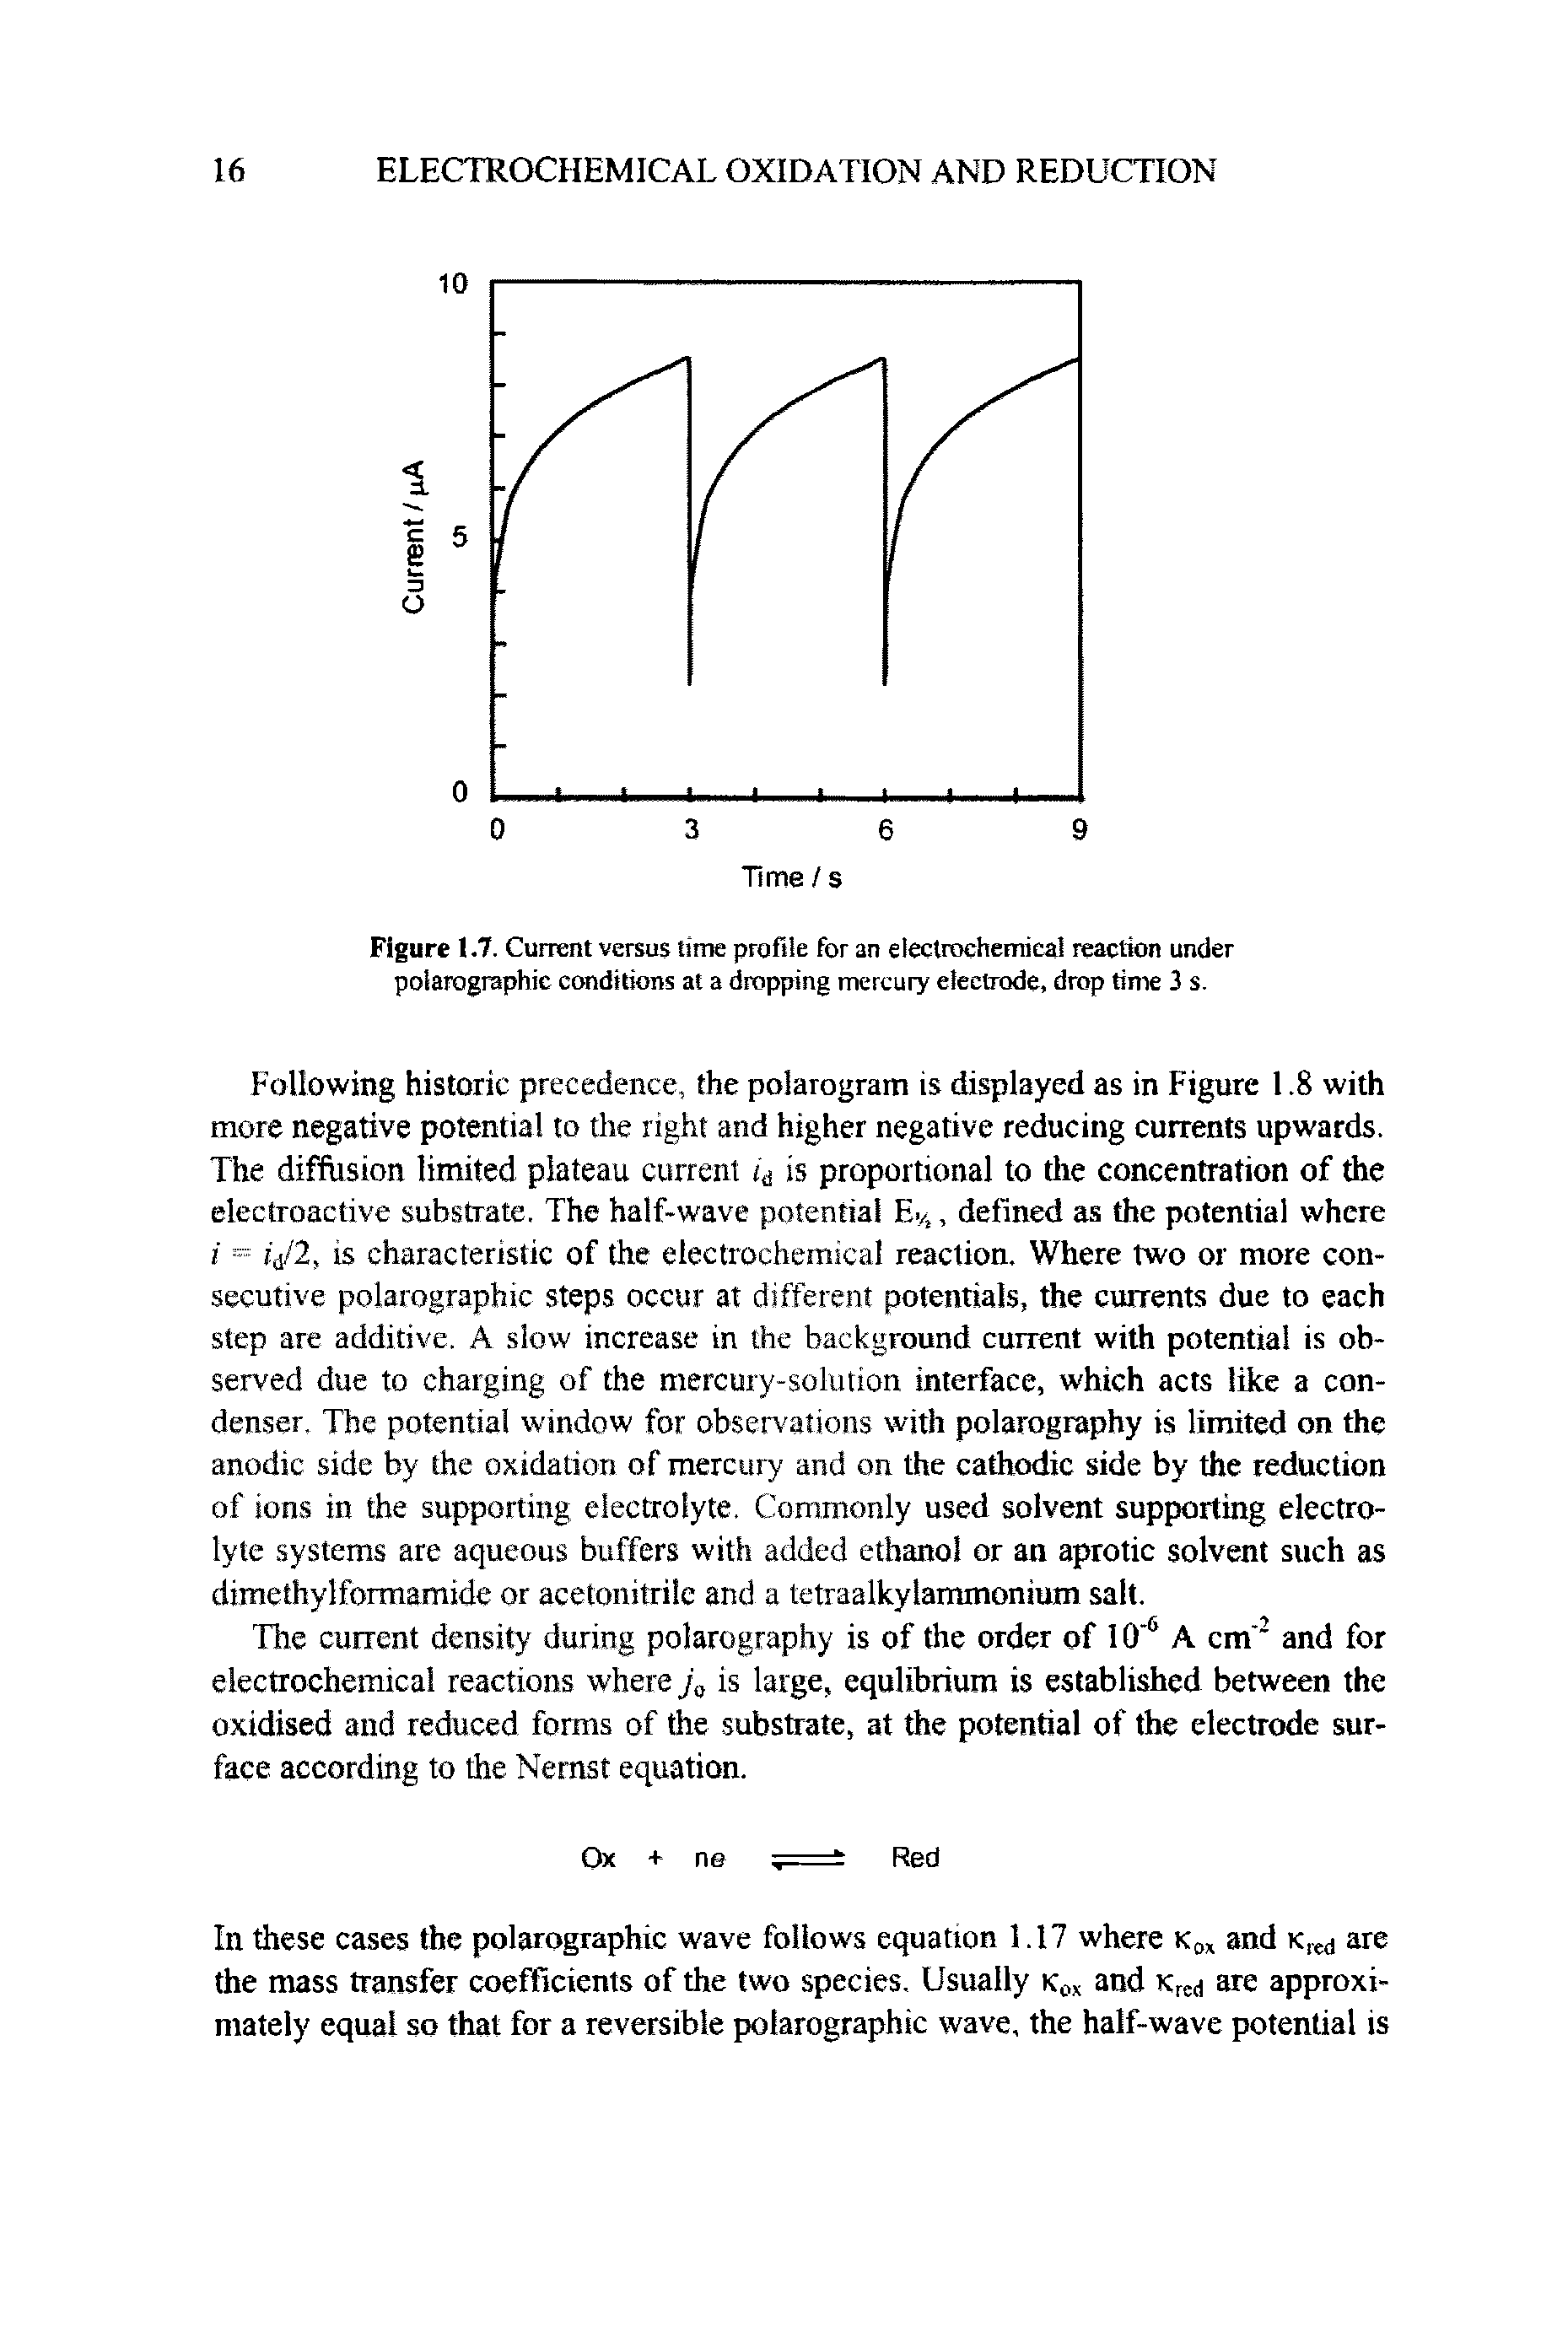 Figure 1.7. Current versus time profile for an electrochemical reaction under polarographic conditions at a dropping mercury electrode, drop time 3 s.